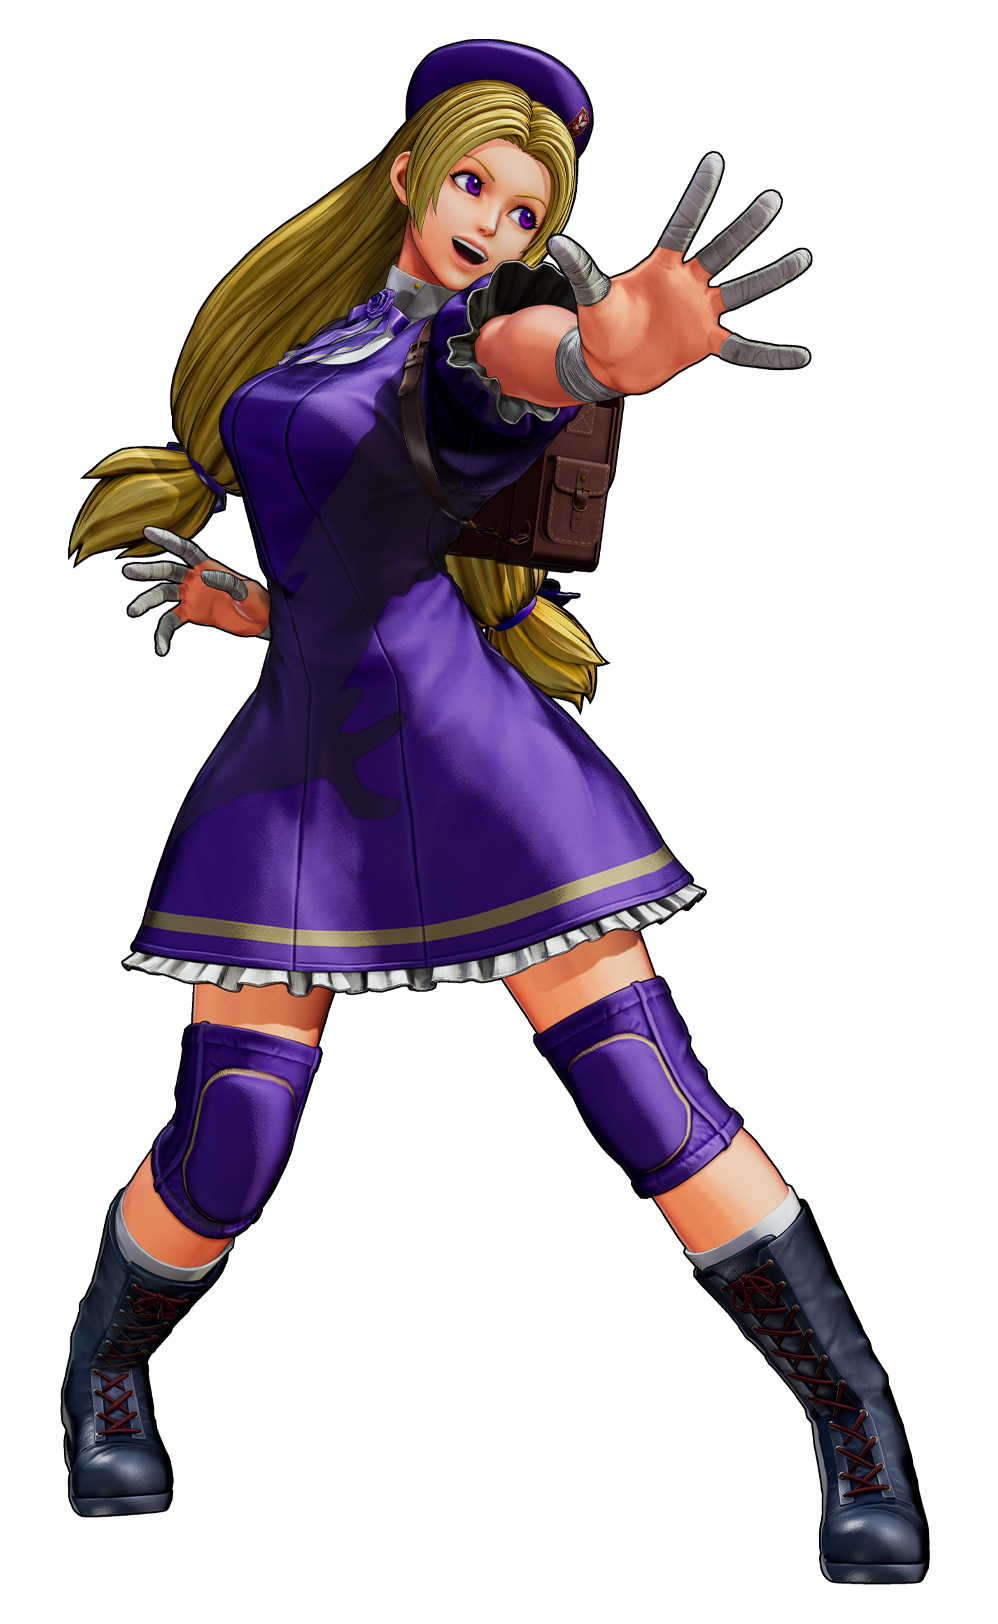 The King of Fighters XIII Iori Yagami The King of Fighters 2002: Unlimited  Match, hero girl, fictional Character, king Of Fighters Xiii, combo png